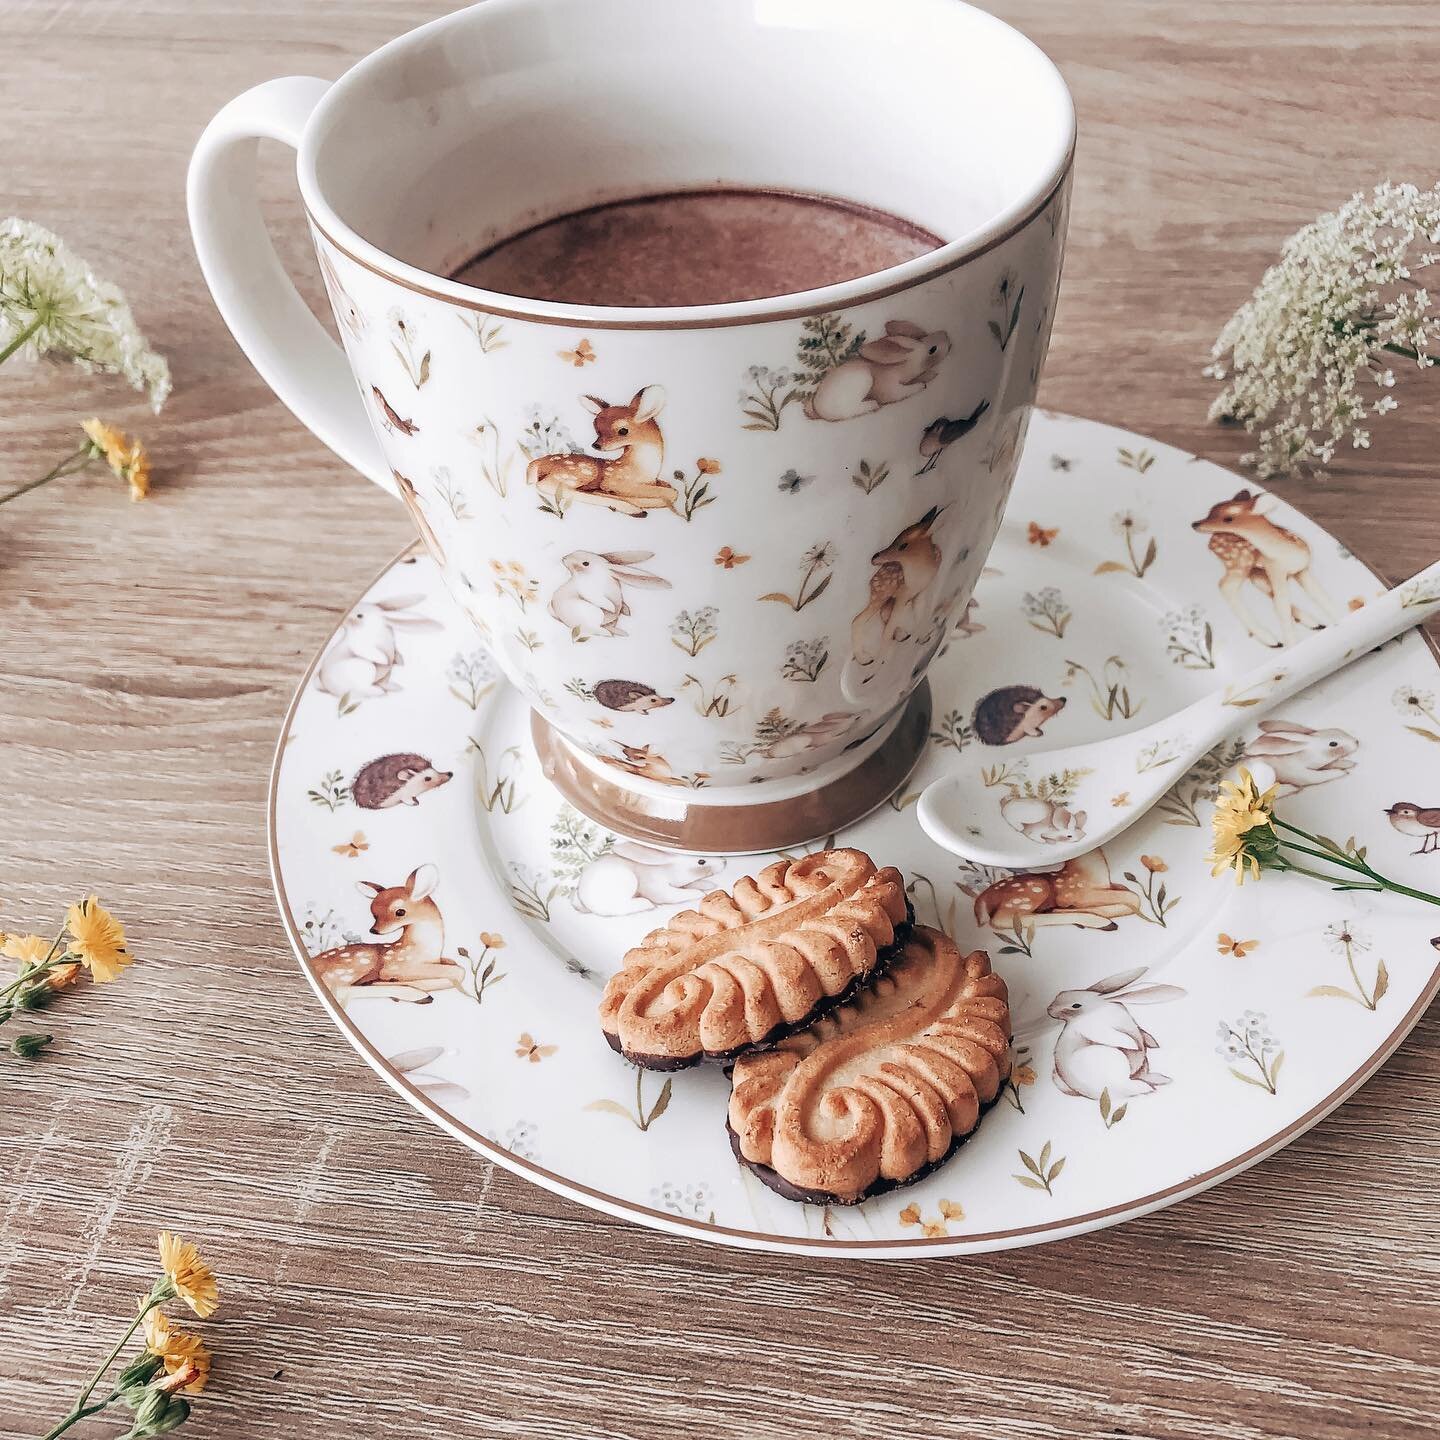 Morning cup of cocoa ☕️ from my favorite cup made by @isabellerosehome &amp; some biscuits 🍪. It has been so long since you&rsquo;ve heard from me here. Life has been pretty interesting and I have been doing some work for amazing clients this summer